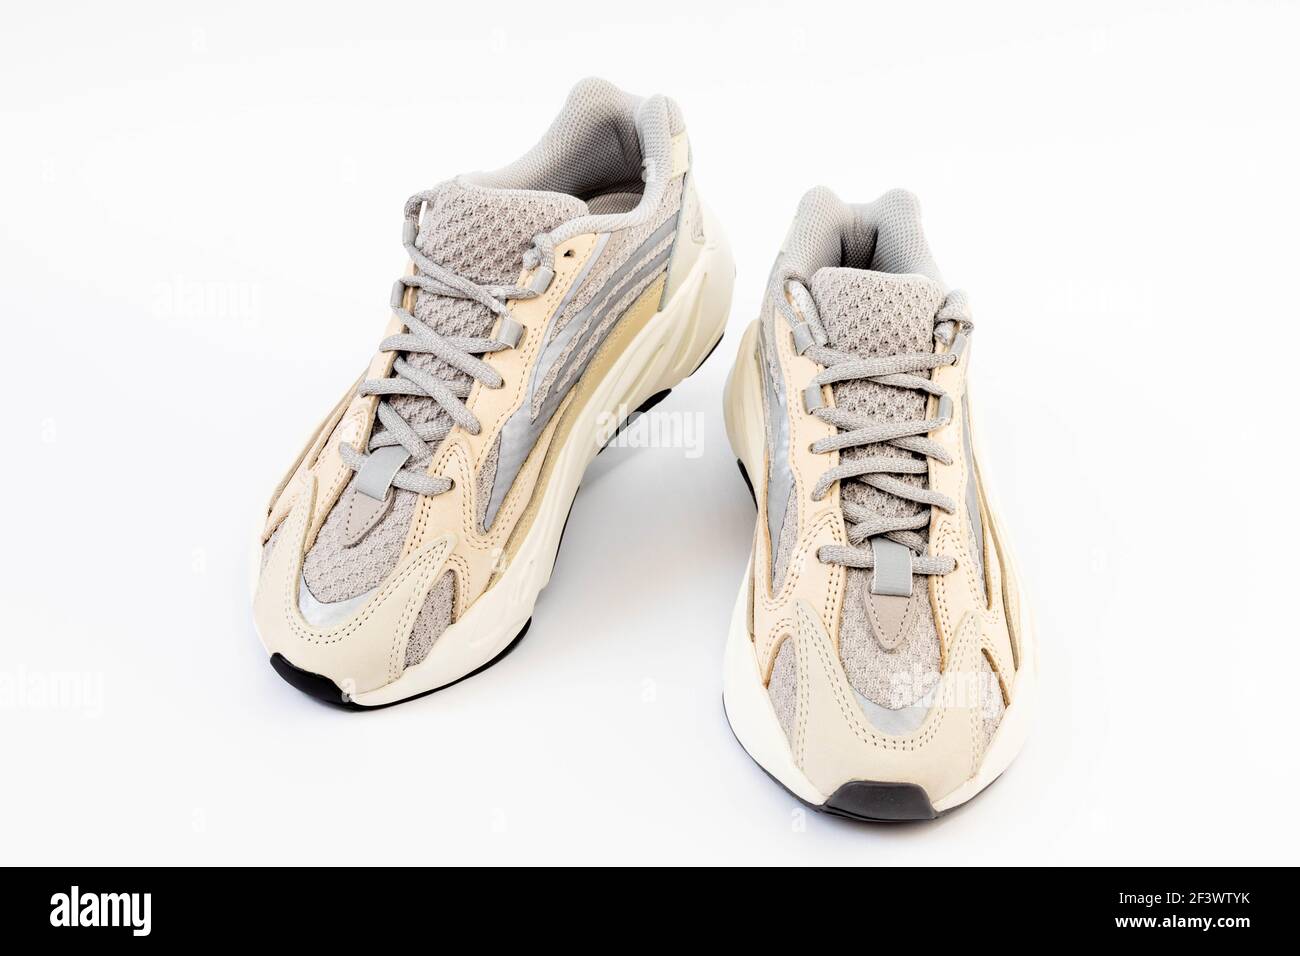 WARSAW, POLAND - Mar 16, 2021: Warsaw, PolAdidas Yeezy boost 700 V2 Cream. Famous limited collection sneakers. Adidas running shoes isolated on a whit Stock Photo